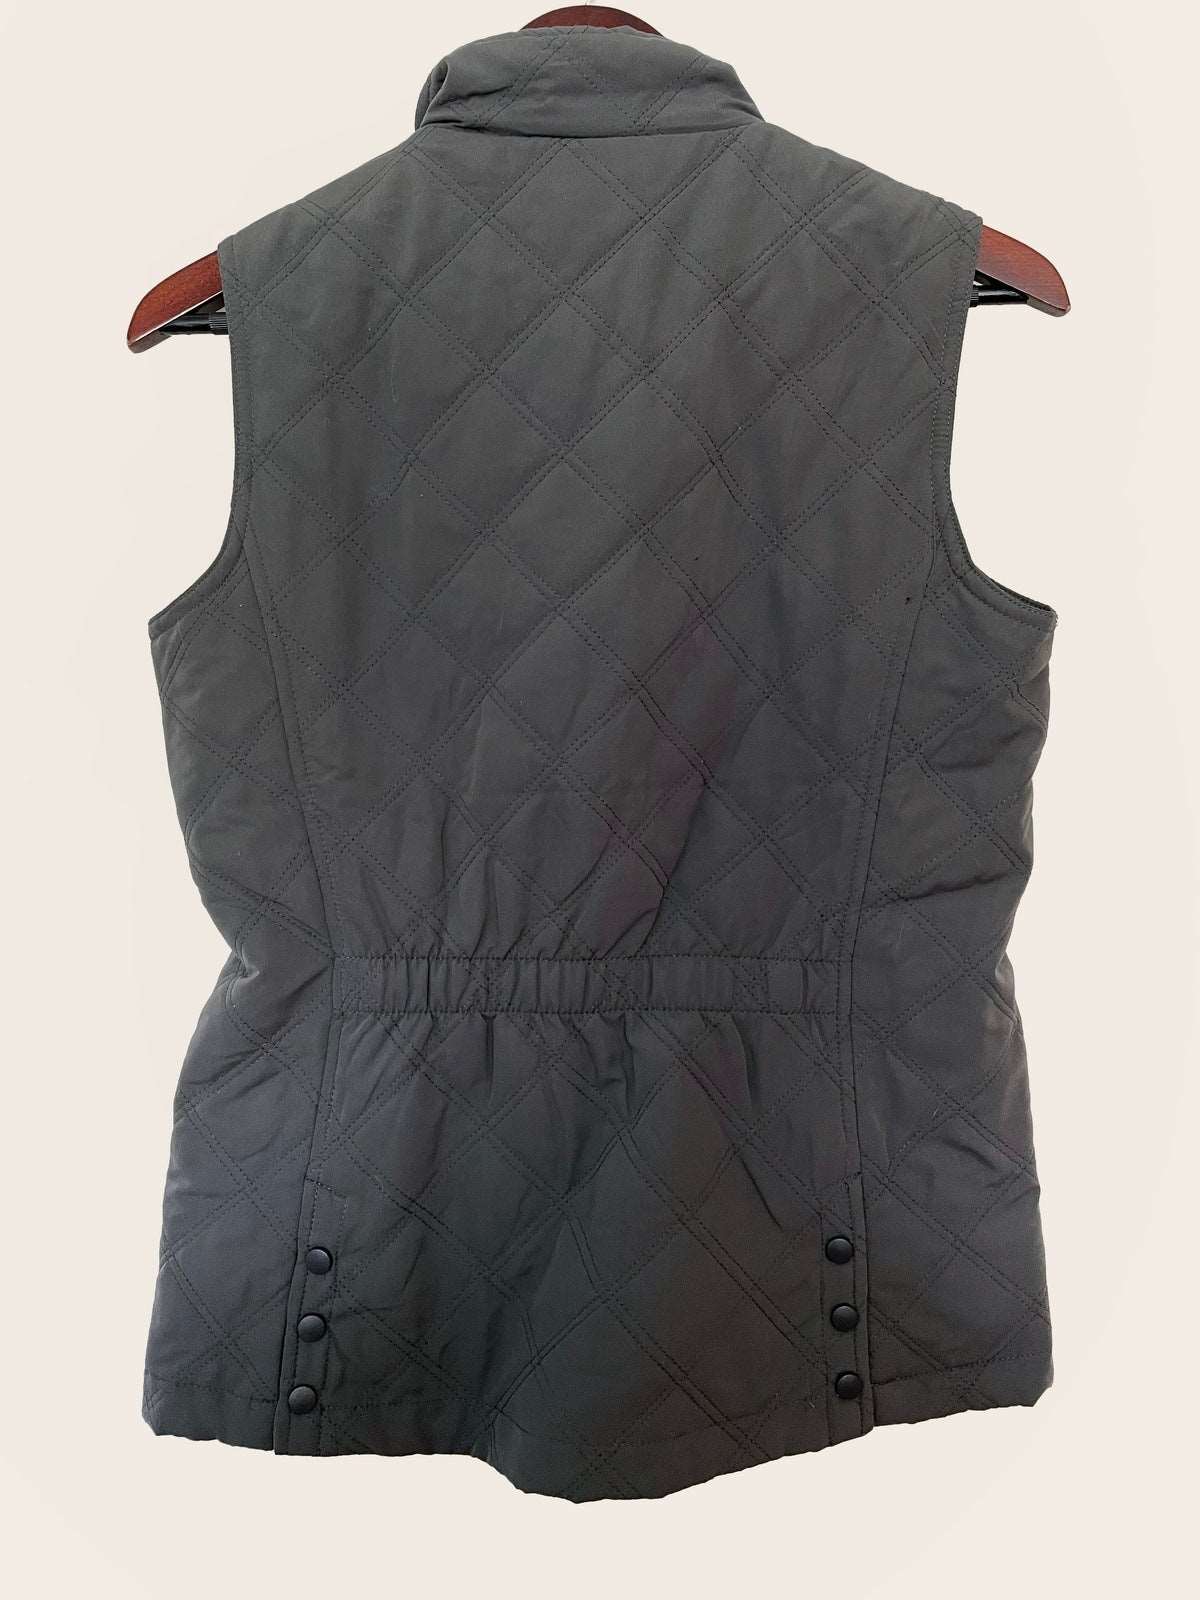 ThriftedEquestrian Clothing Small Riding Sport Vest NWT - Small